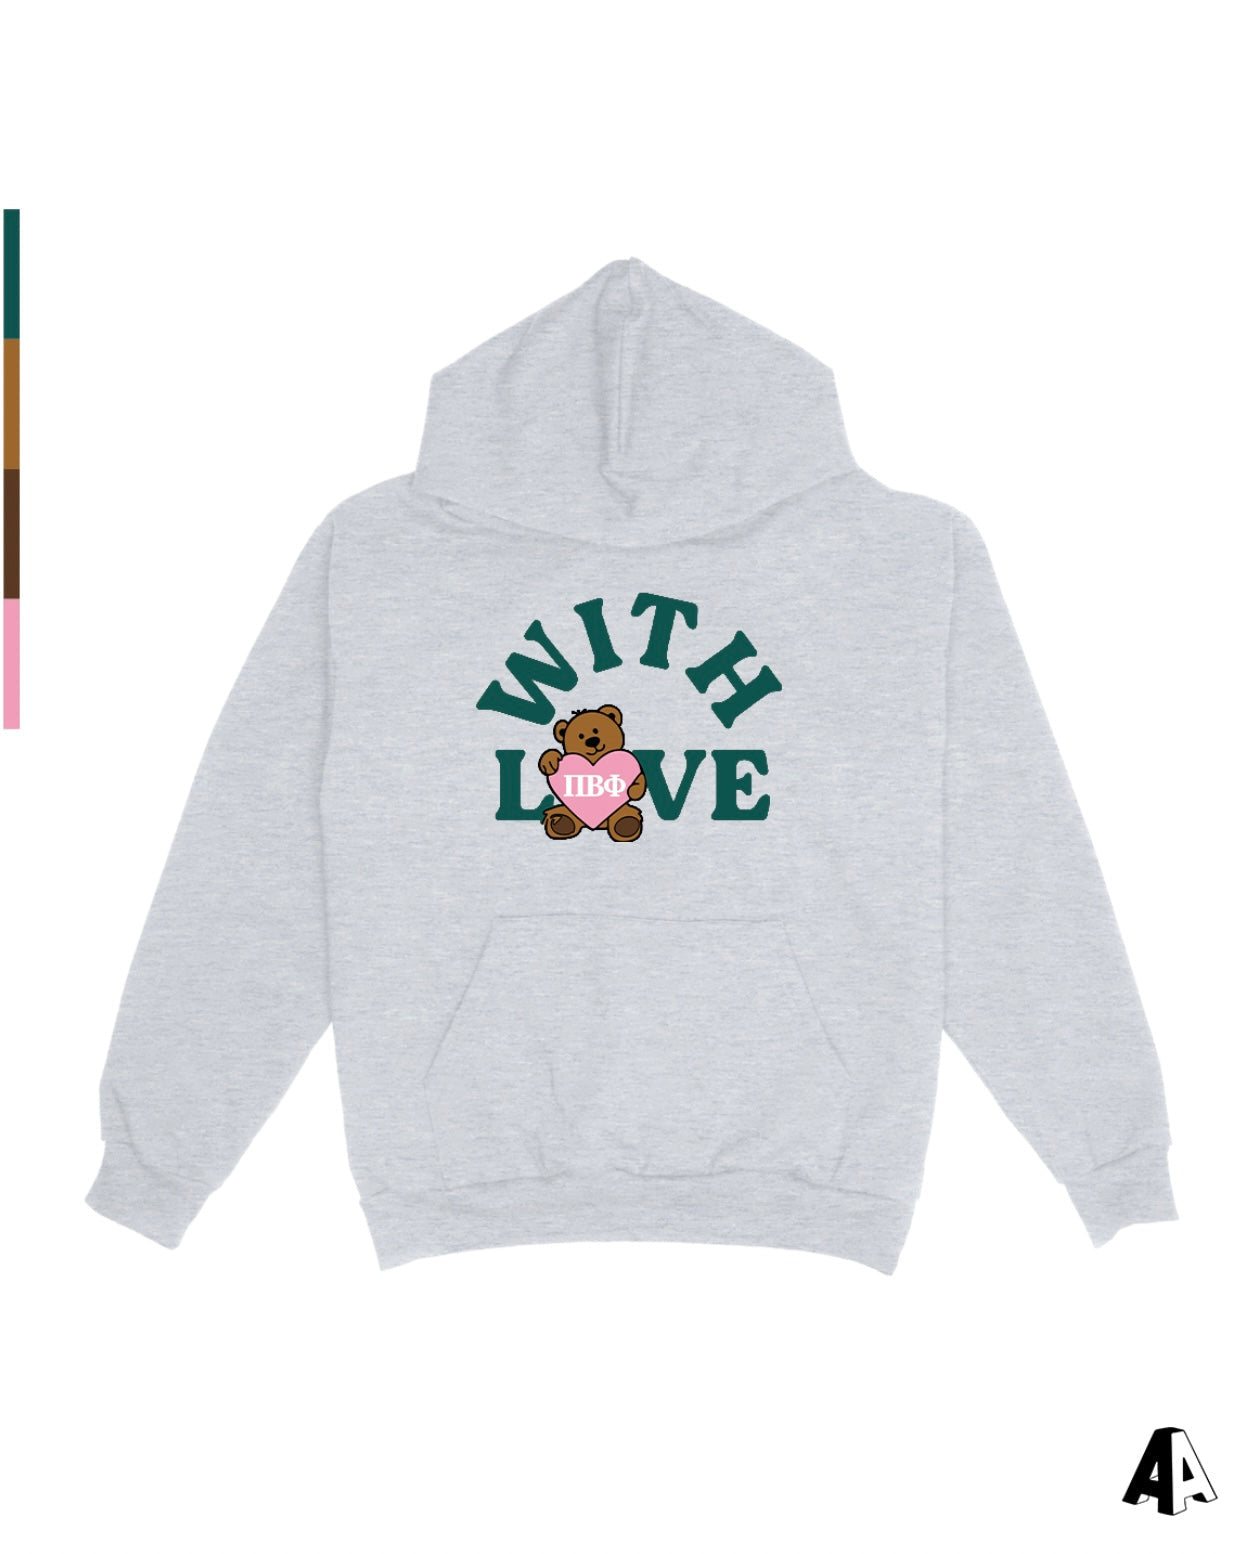 With Love Hoodie - Pi Beta Phi / Small